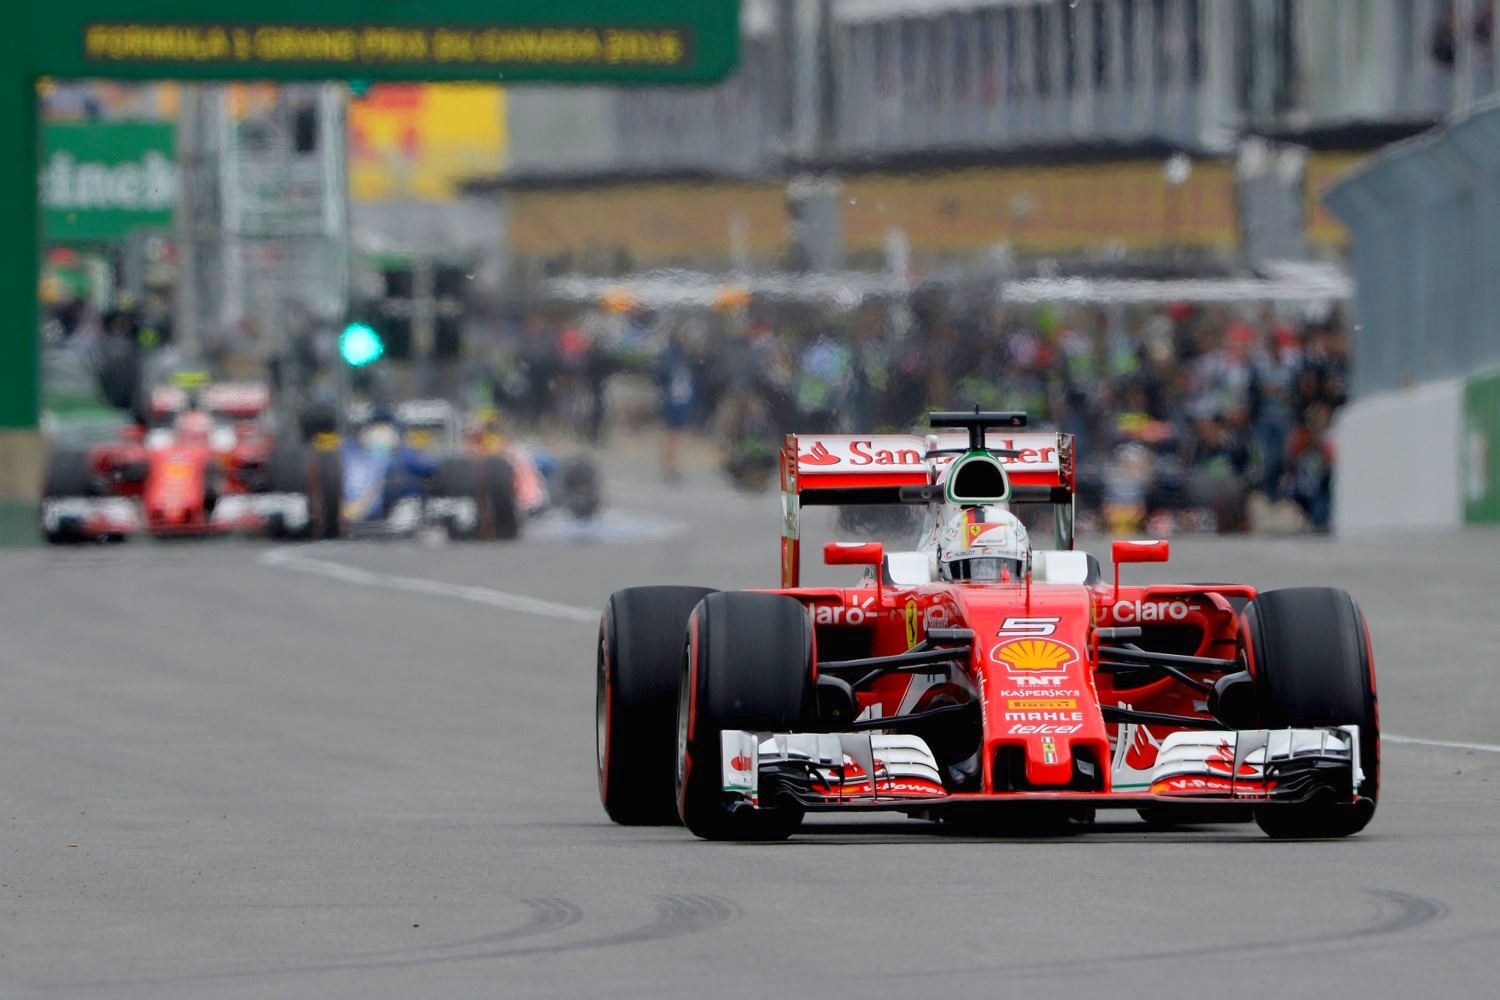 Vettel close to Mercedes, but Mercedes likes to sandbag on Friday